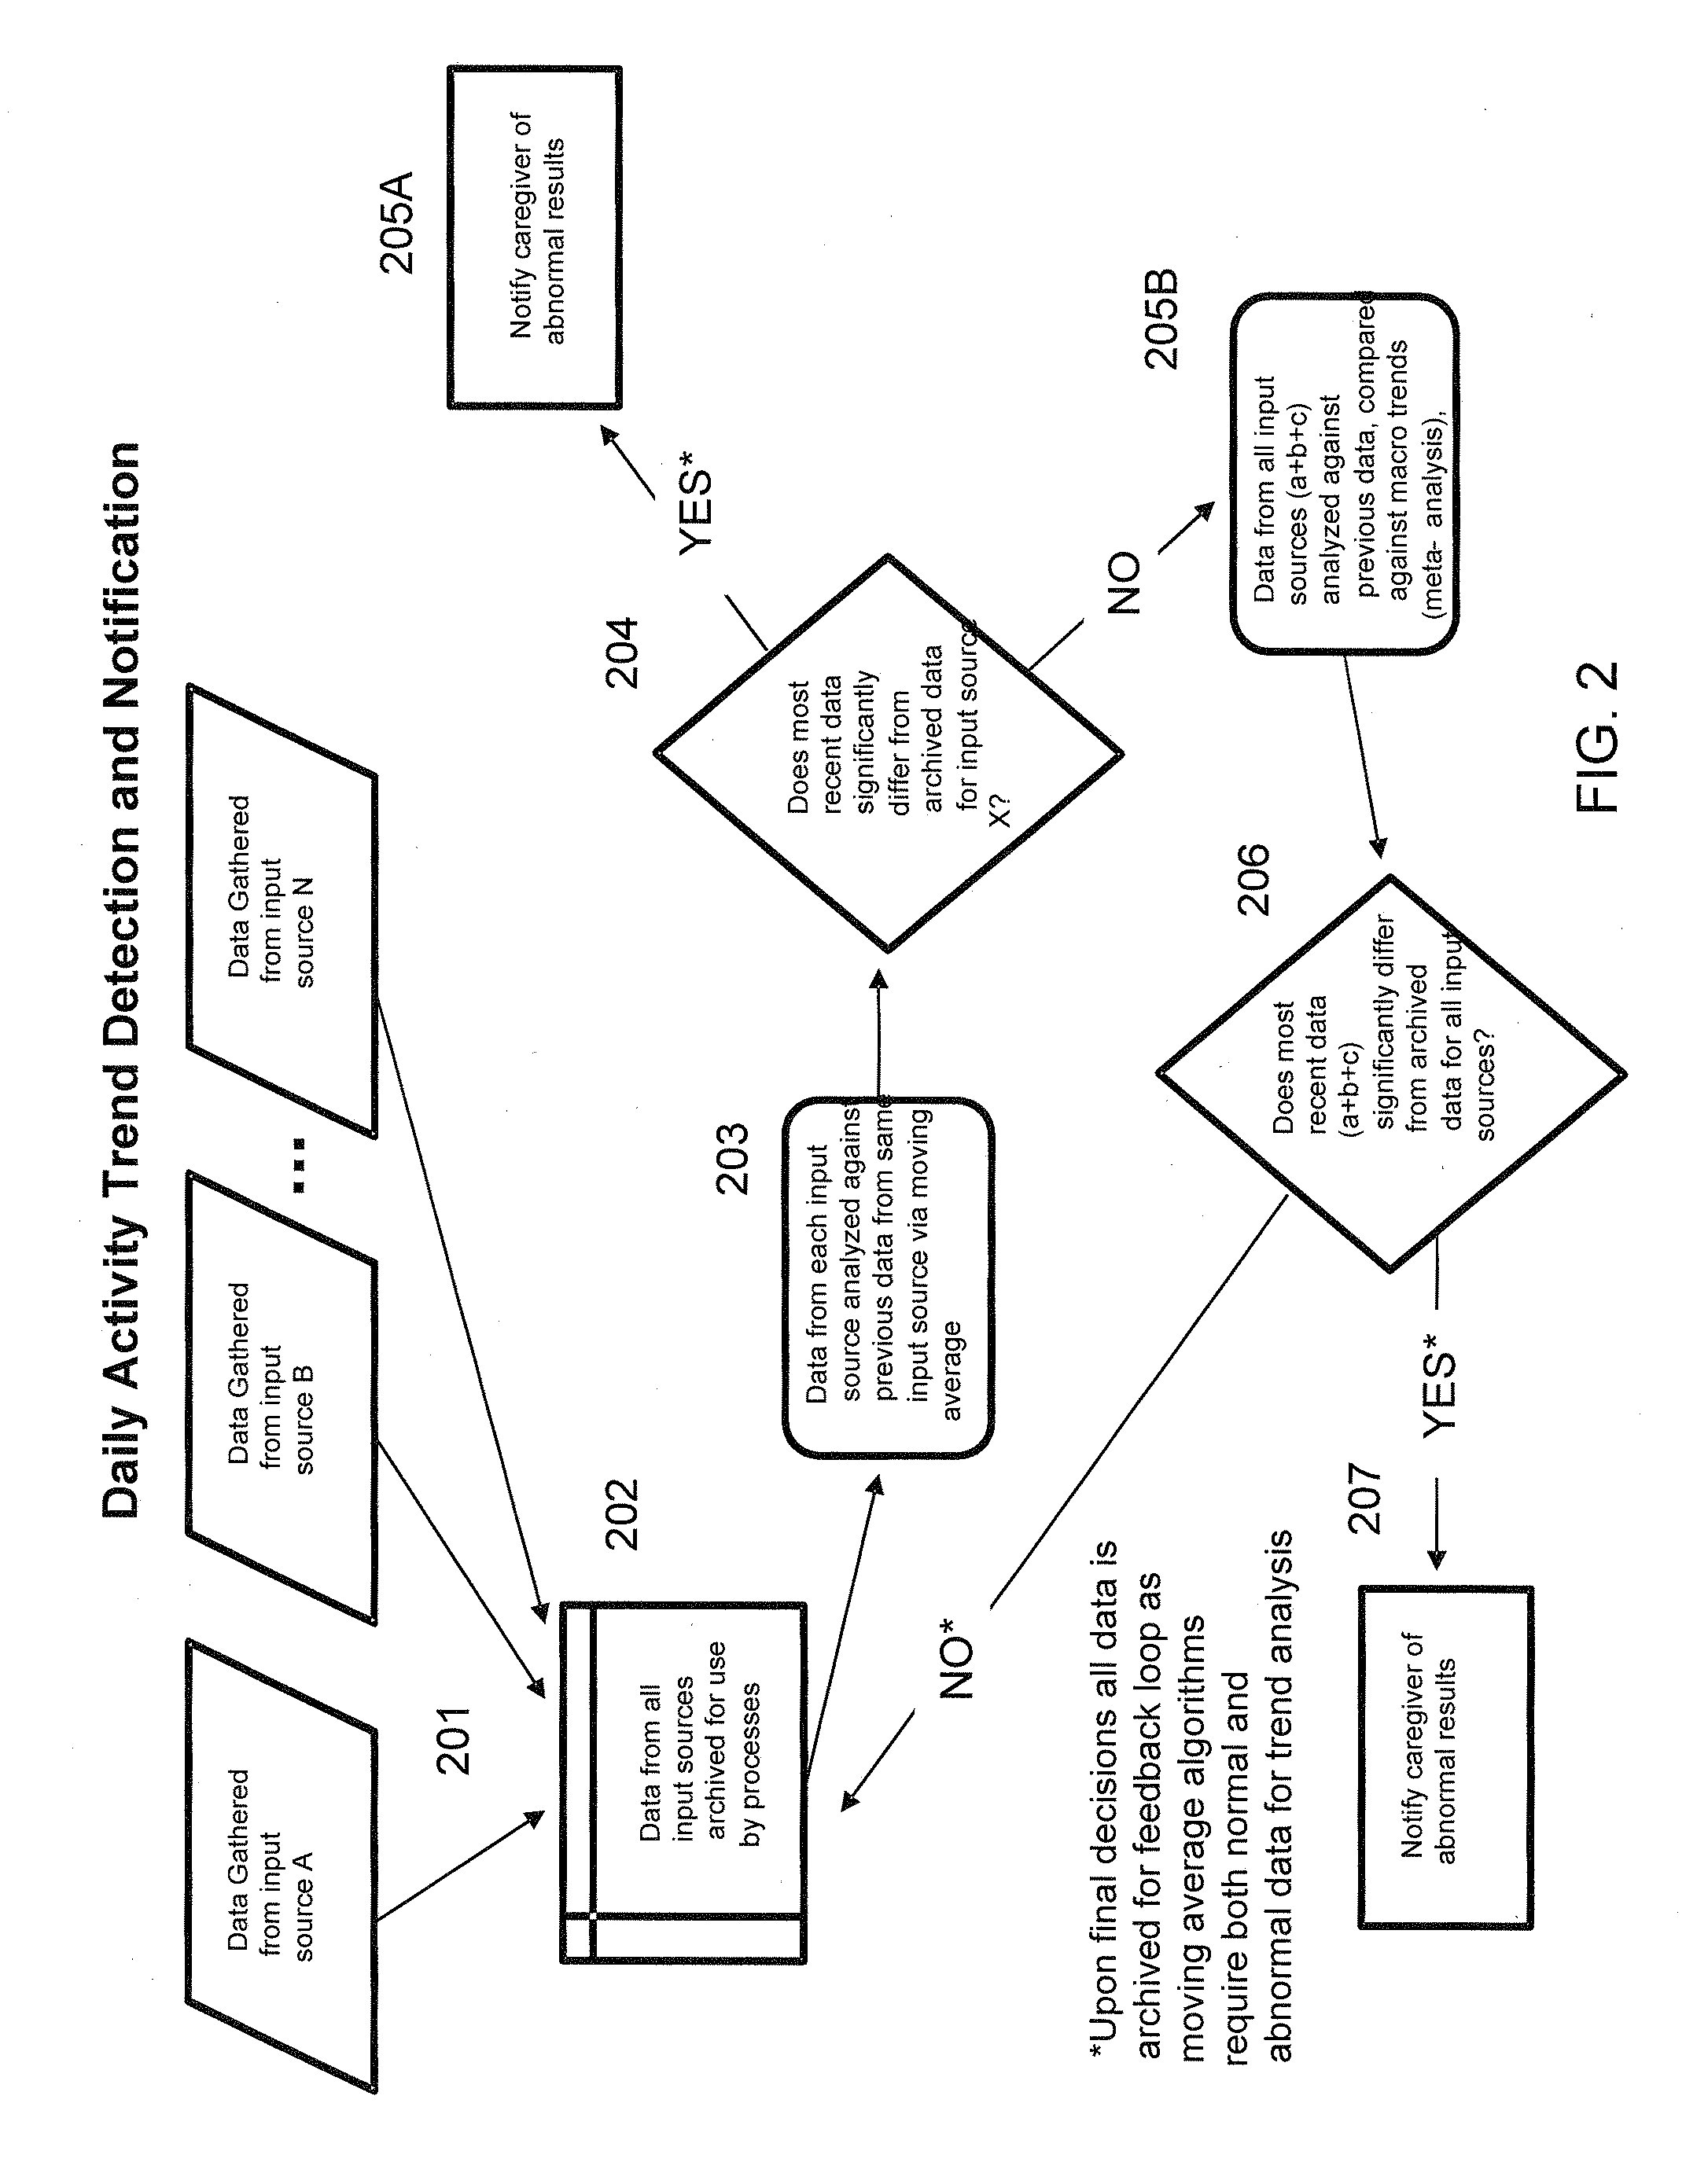 Activity trend detection and notification to a caregiver